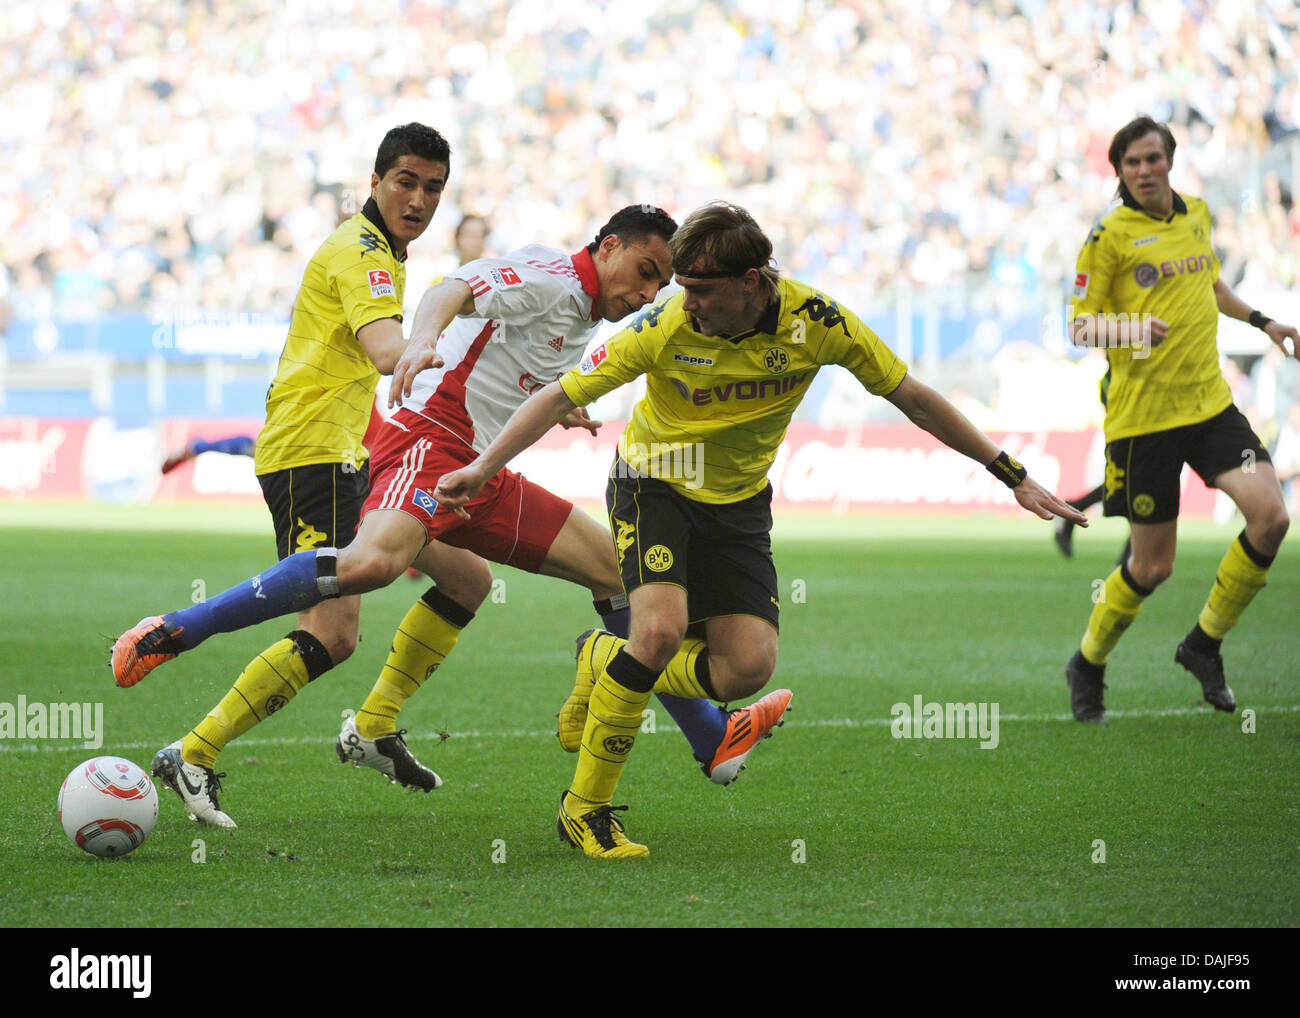 Hamburg's  Aenis Ben-Hatira (C) fights for the ball against Dortmund's Marcel Schmelzer (2nd from R) and Nuri Sahin (L) during the Bundesliga soccer match between Hamburger SV and Borussia Dortmund at the IMtech Arena in Hamburg, Germany, 09 April 2011. Photo: Christian Charisius Stock Photo